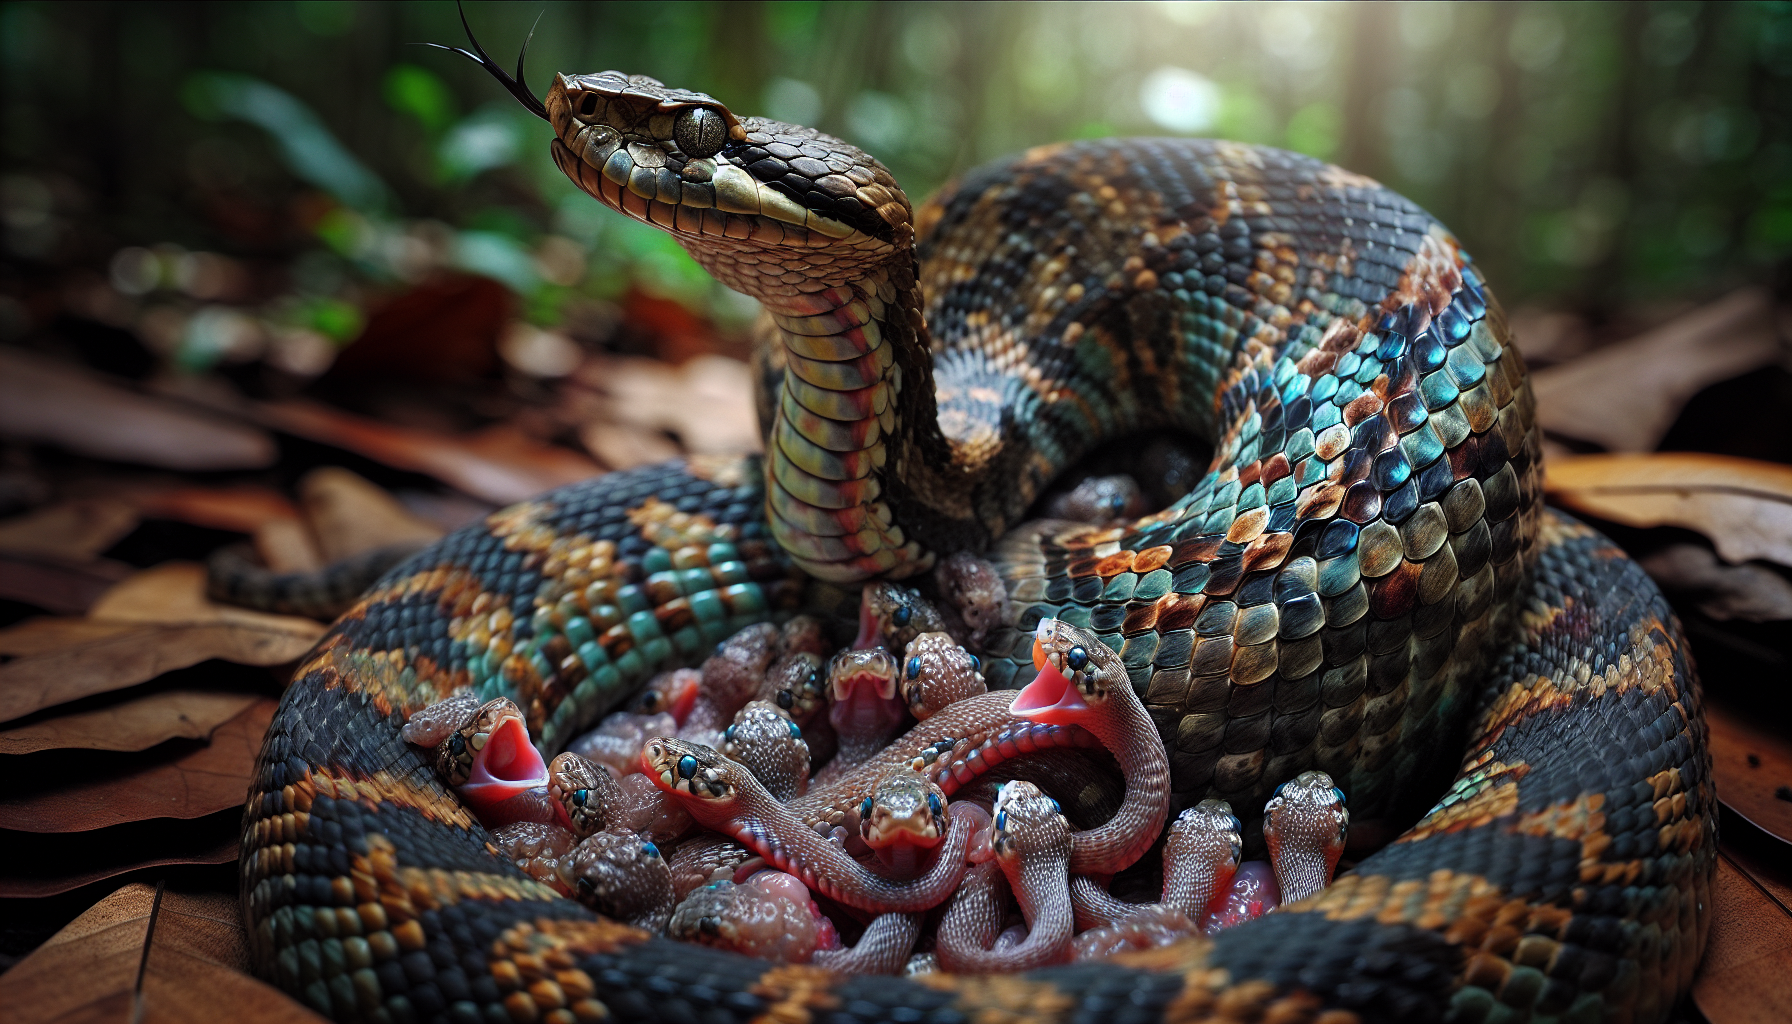 Fer de lance snake giving birth to young offspring